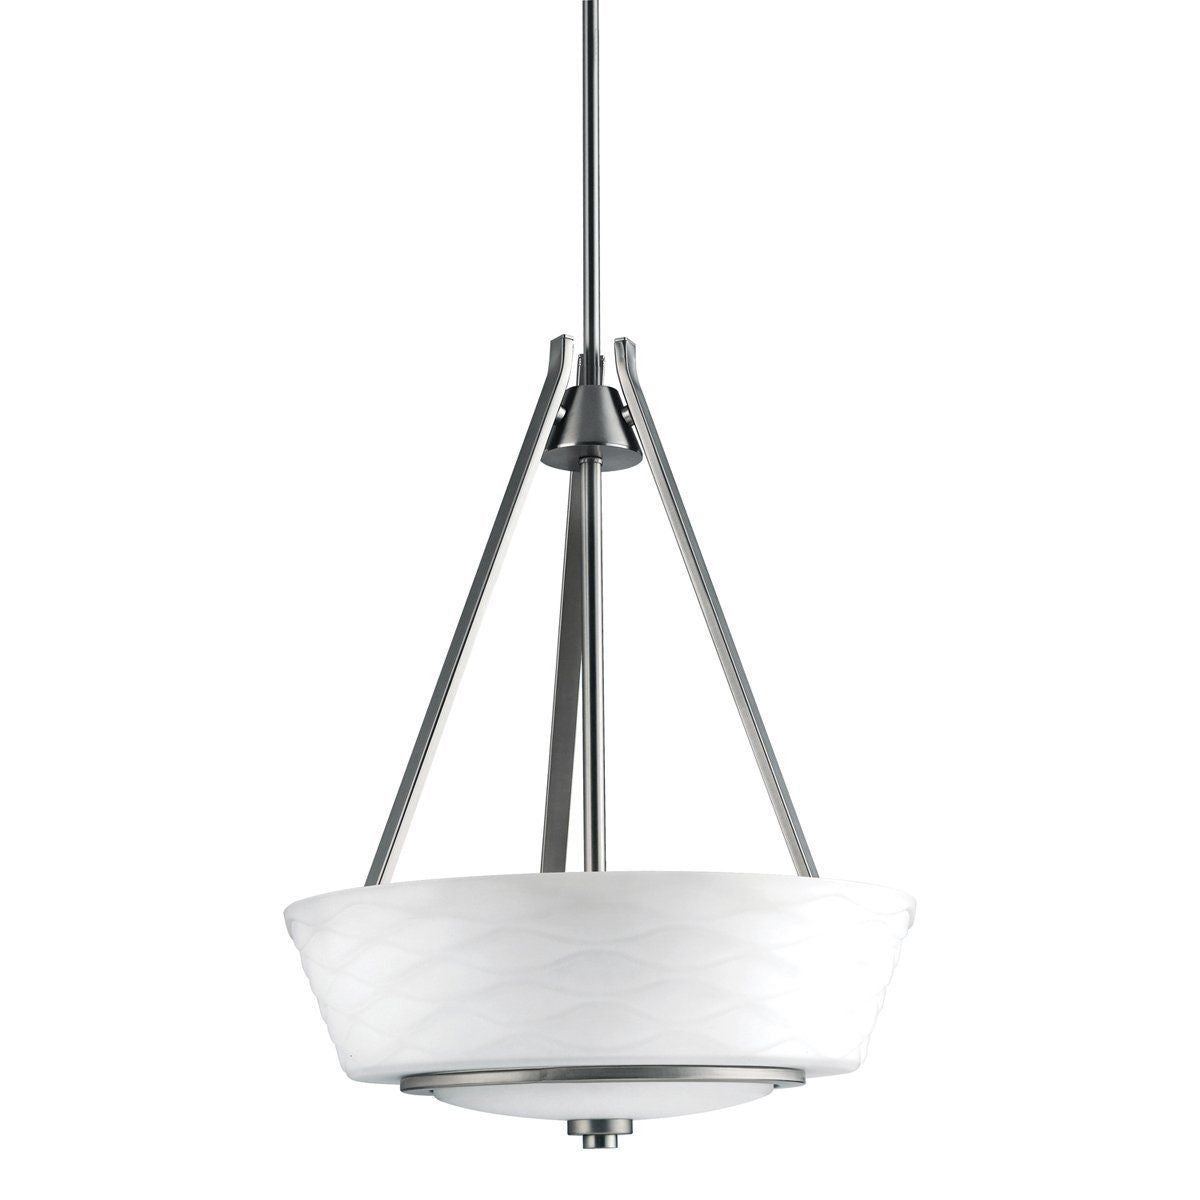 Aztec by Kichler Lighting 34982 Three Light Daphne Collection Hanging Pendant Chandelier in Brushed Nickel Finish